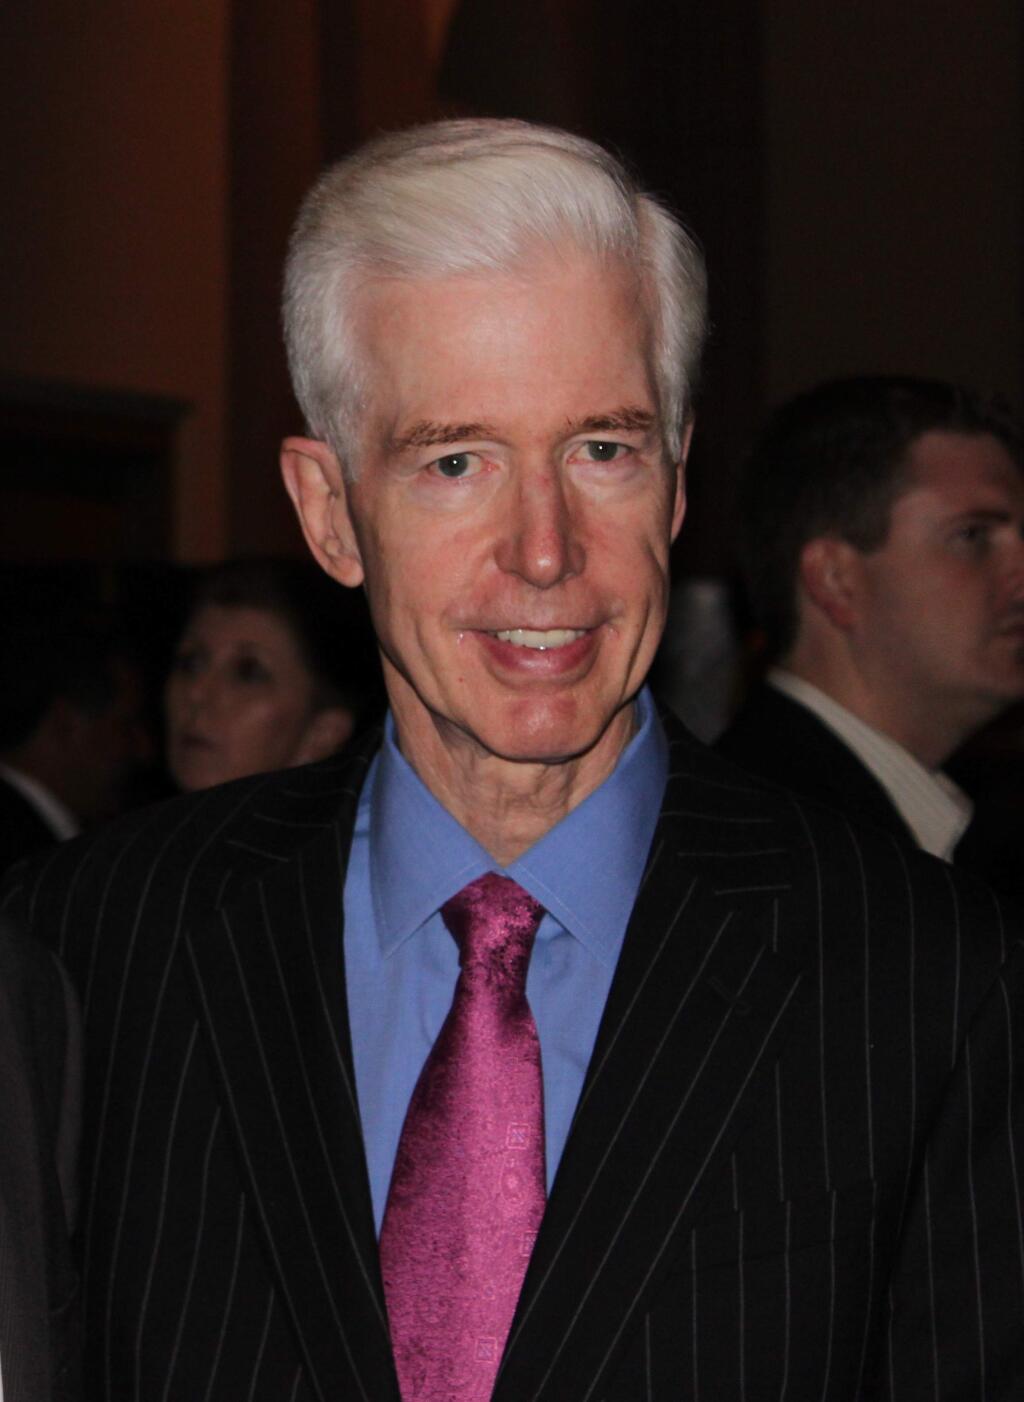 Former Gov. Gray Davis was recalled in 2003, only months after winning re-election.